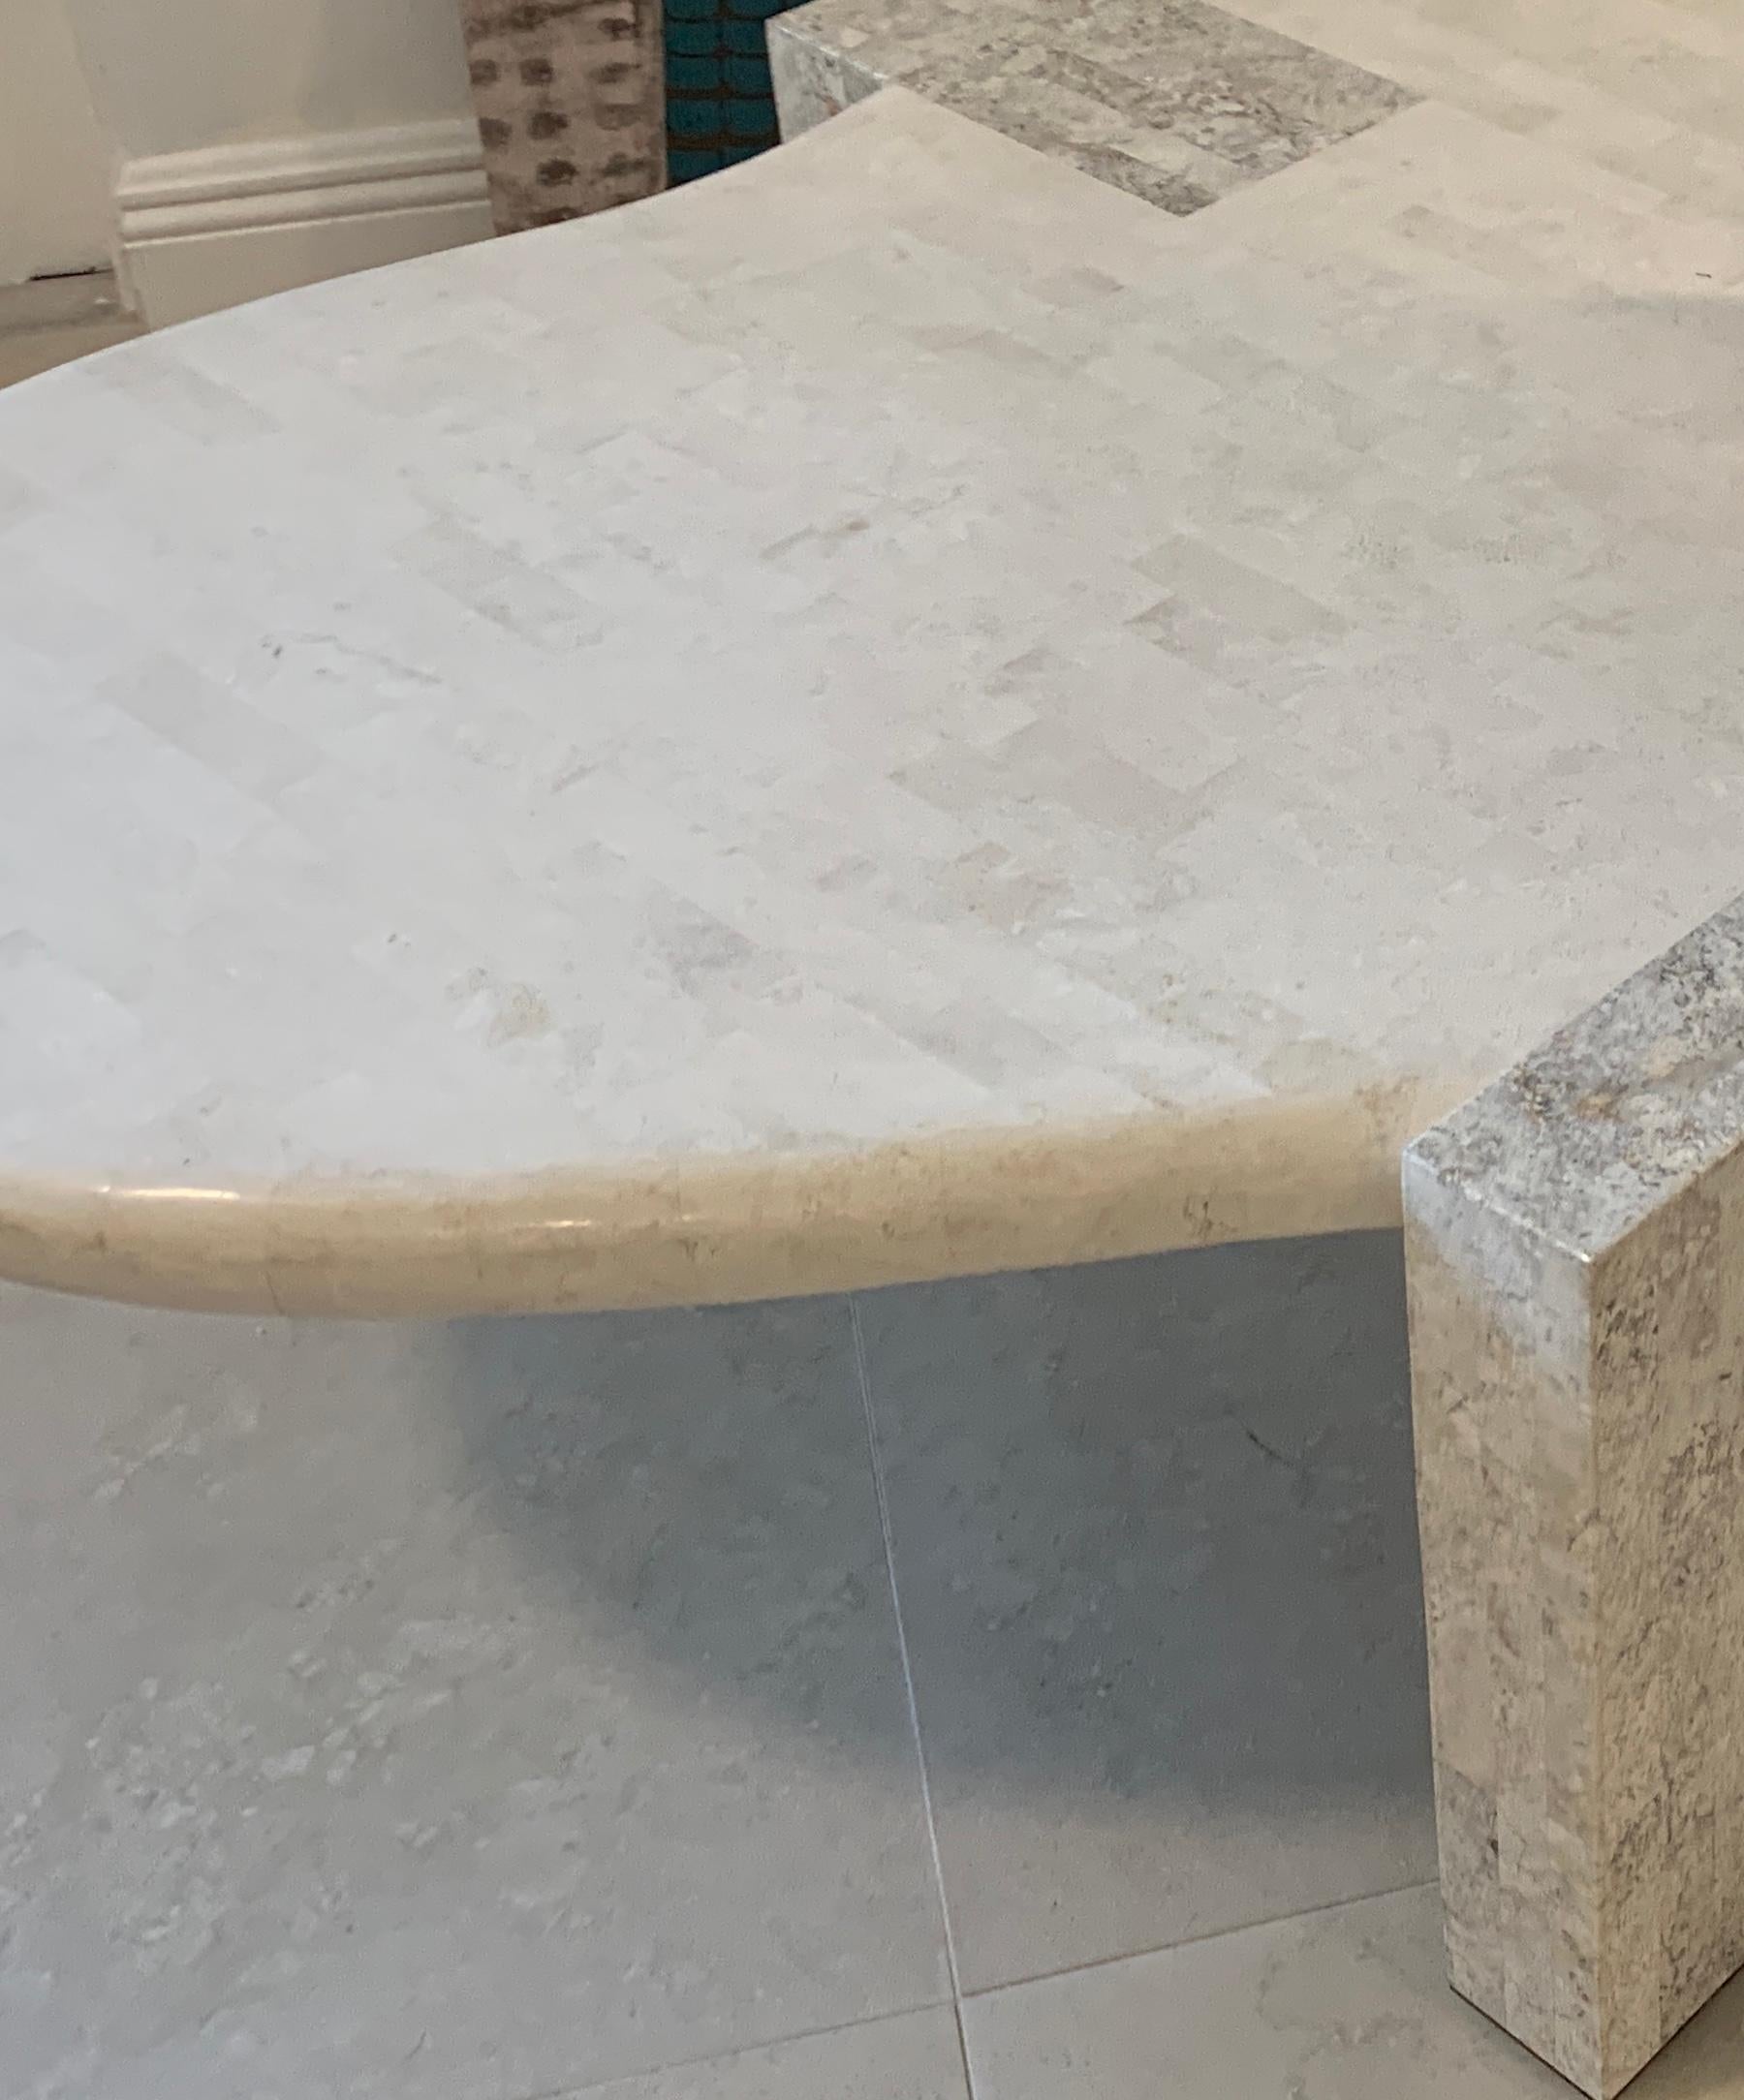 Tessellated stone biomorphic coffee table, by Maitland Smith
A substantial table beautifully and seamlessly crafted in two color neutral stone, raised on three dovetailed rectangular block legs.
 